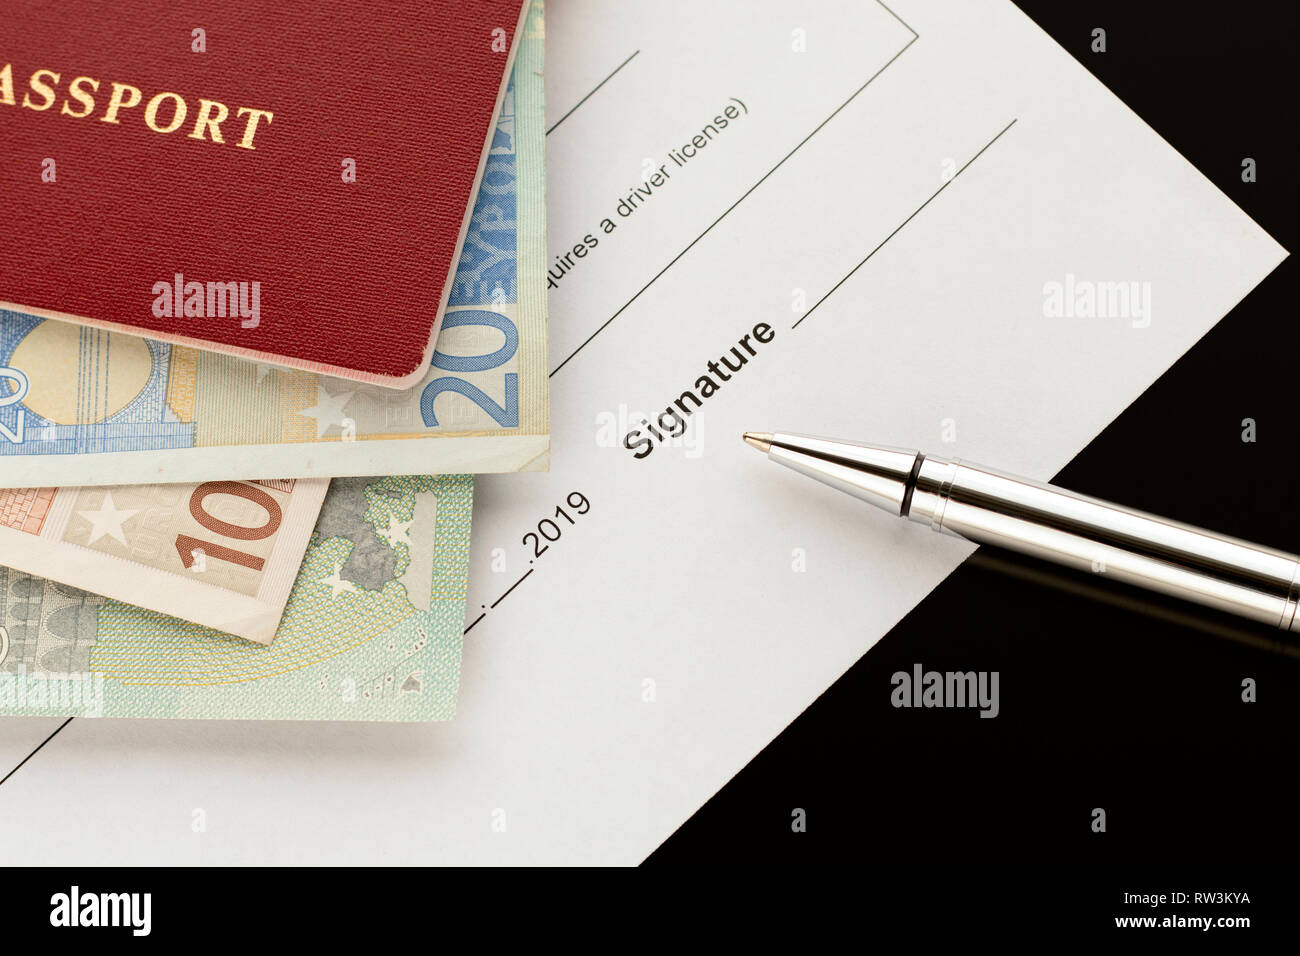 Signature, signing a document. Passport with euro banknotes. Topics of car rental, car sharing, insurance compensation Stock Photo